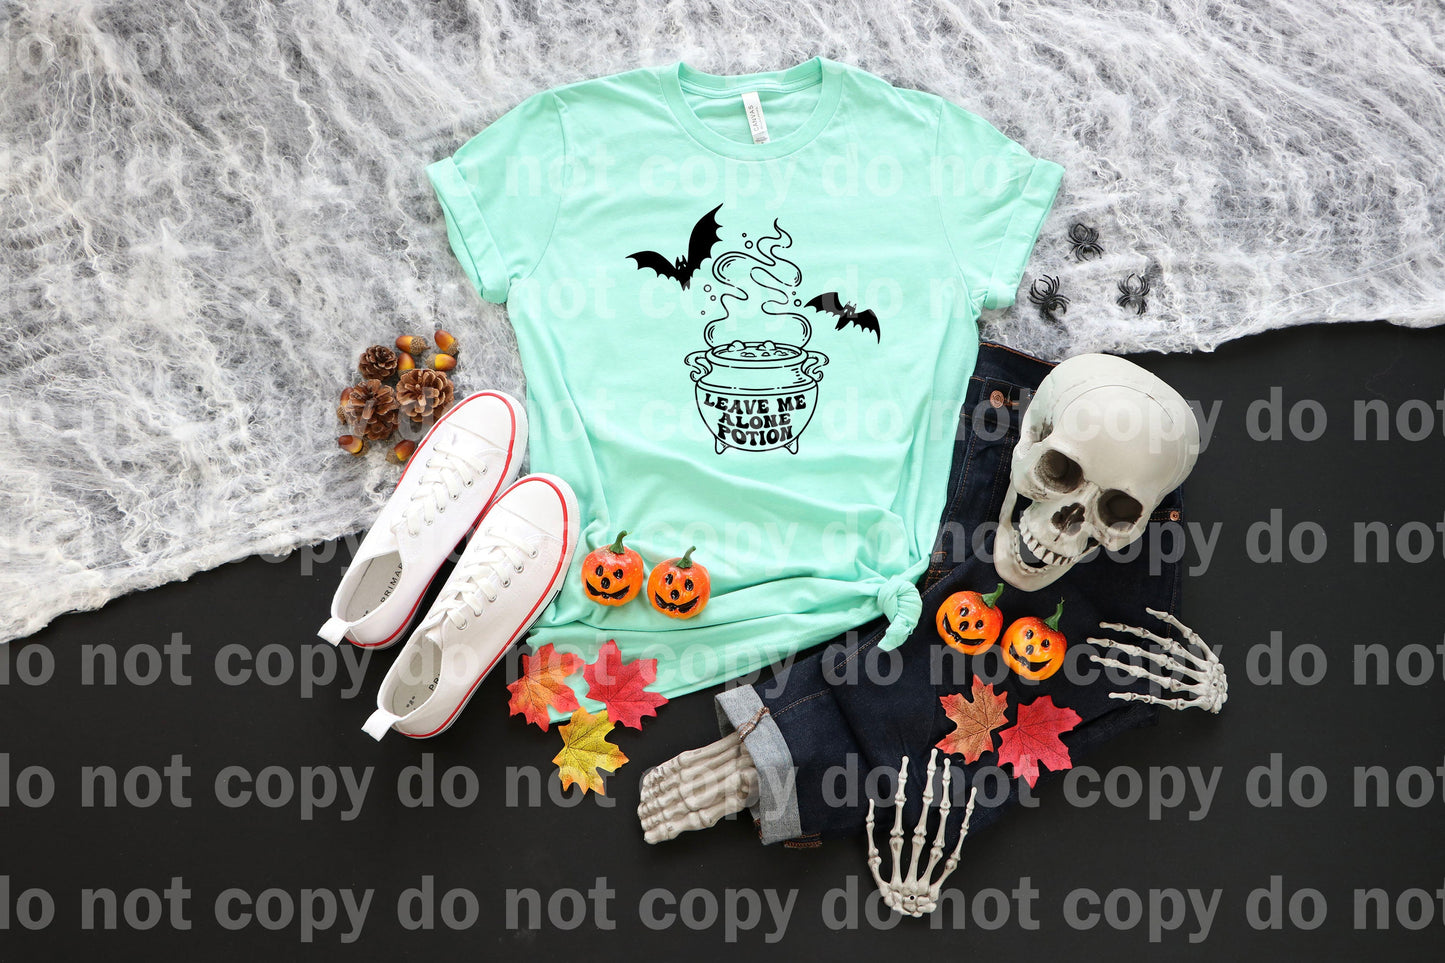 Leave Me Alone Potion Full Color/One Color Dream Print or Sublimation Print